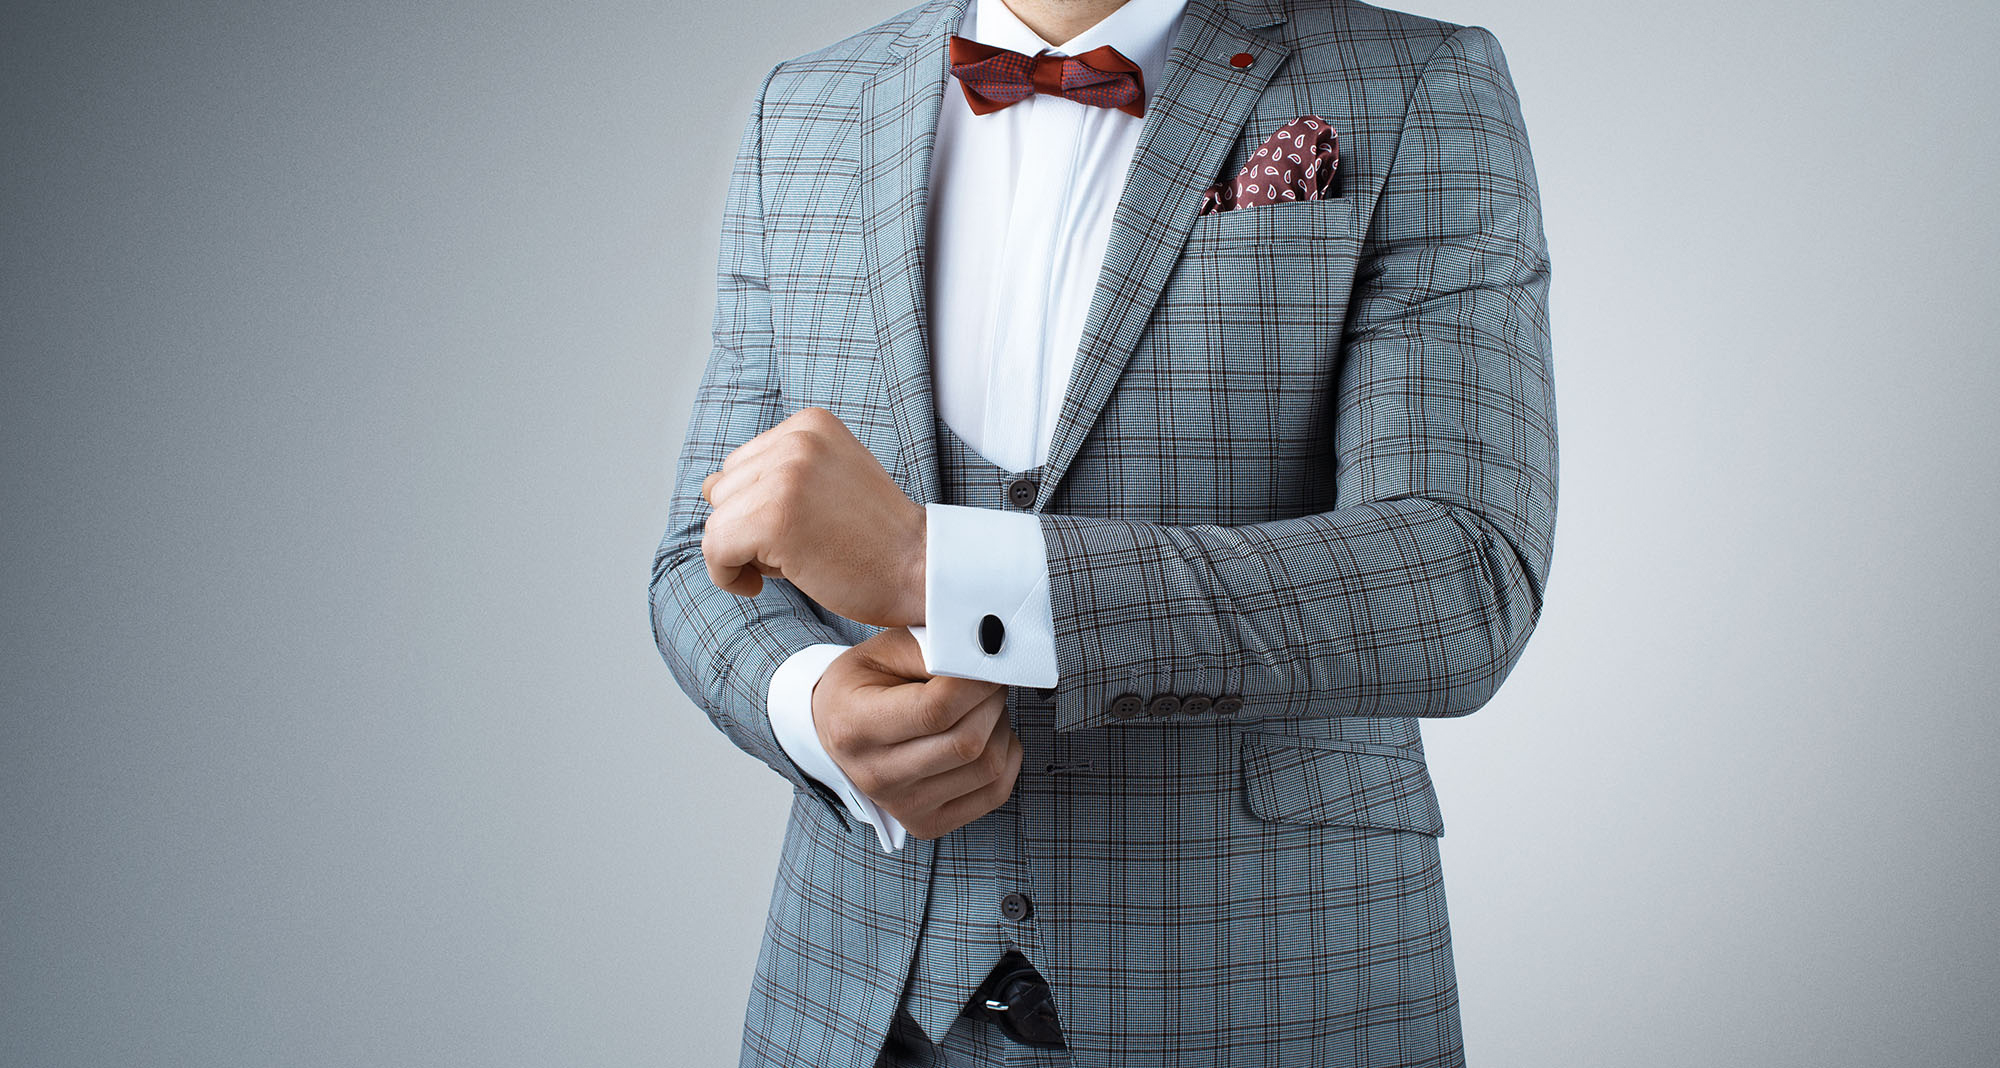 Accessories That Complement Your Corporate Look